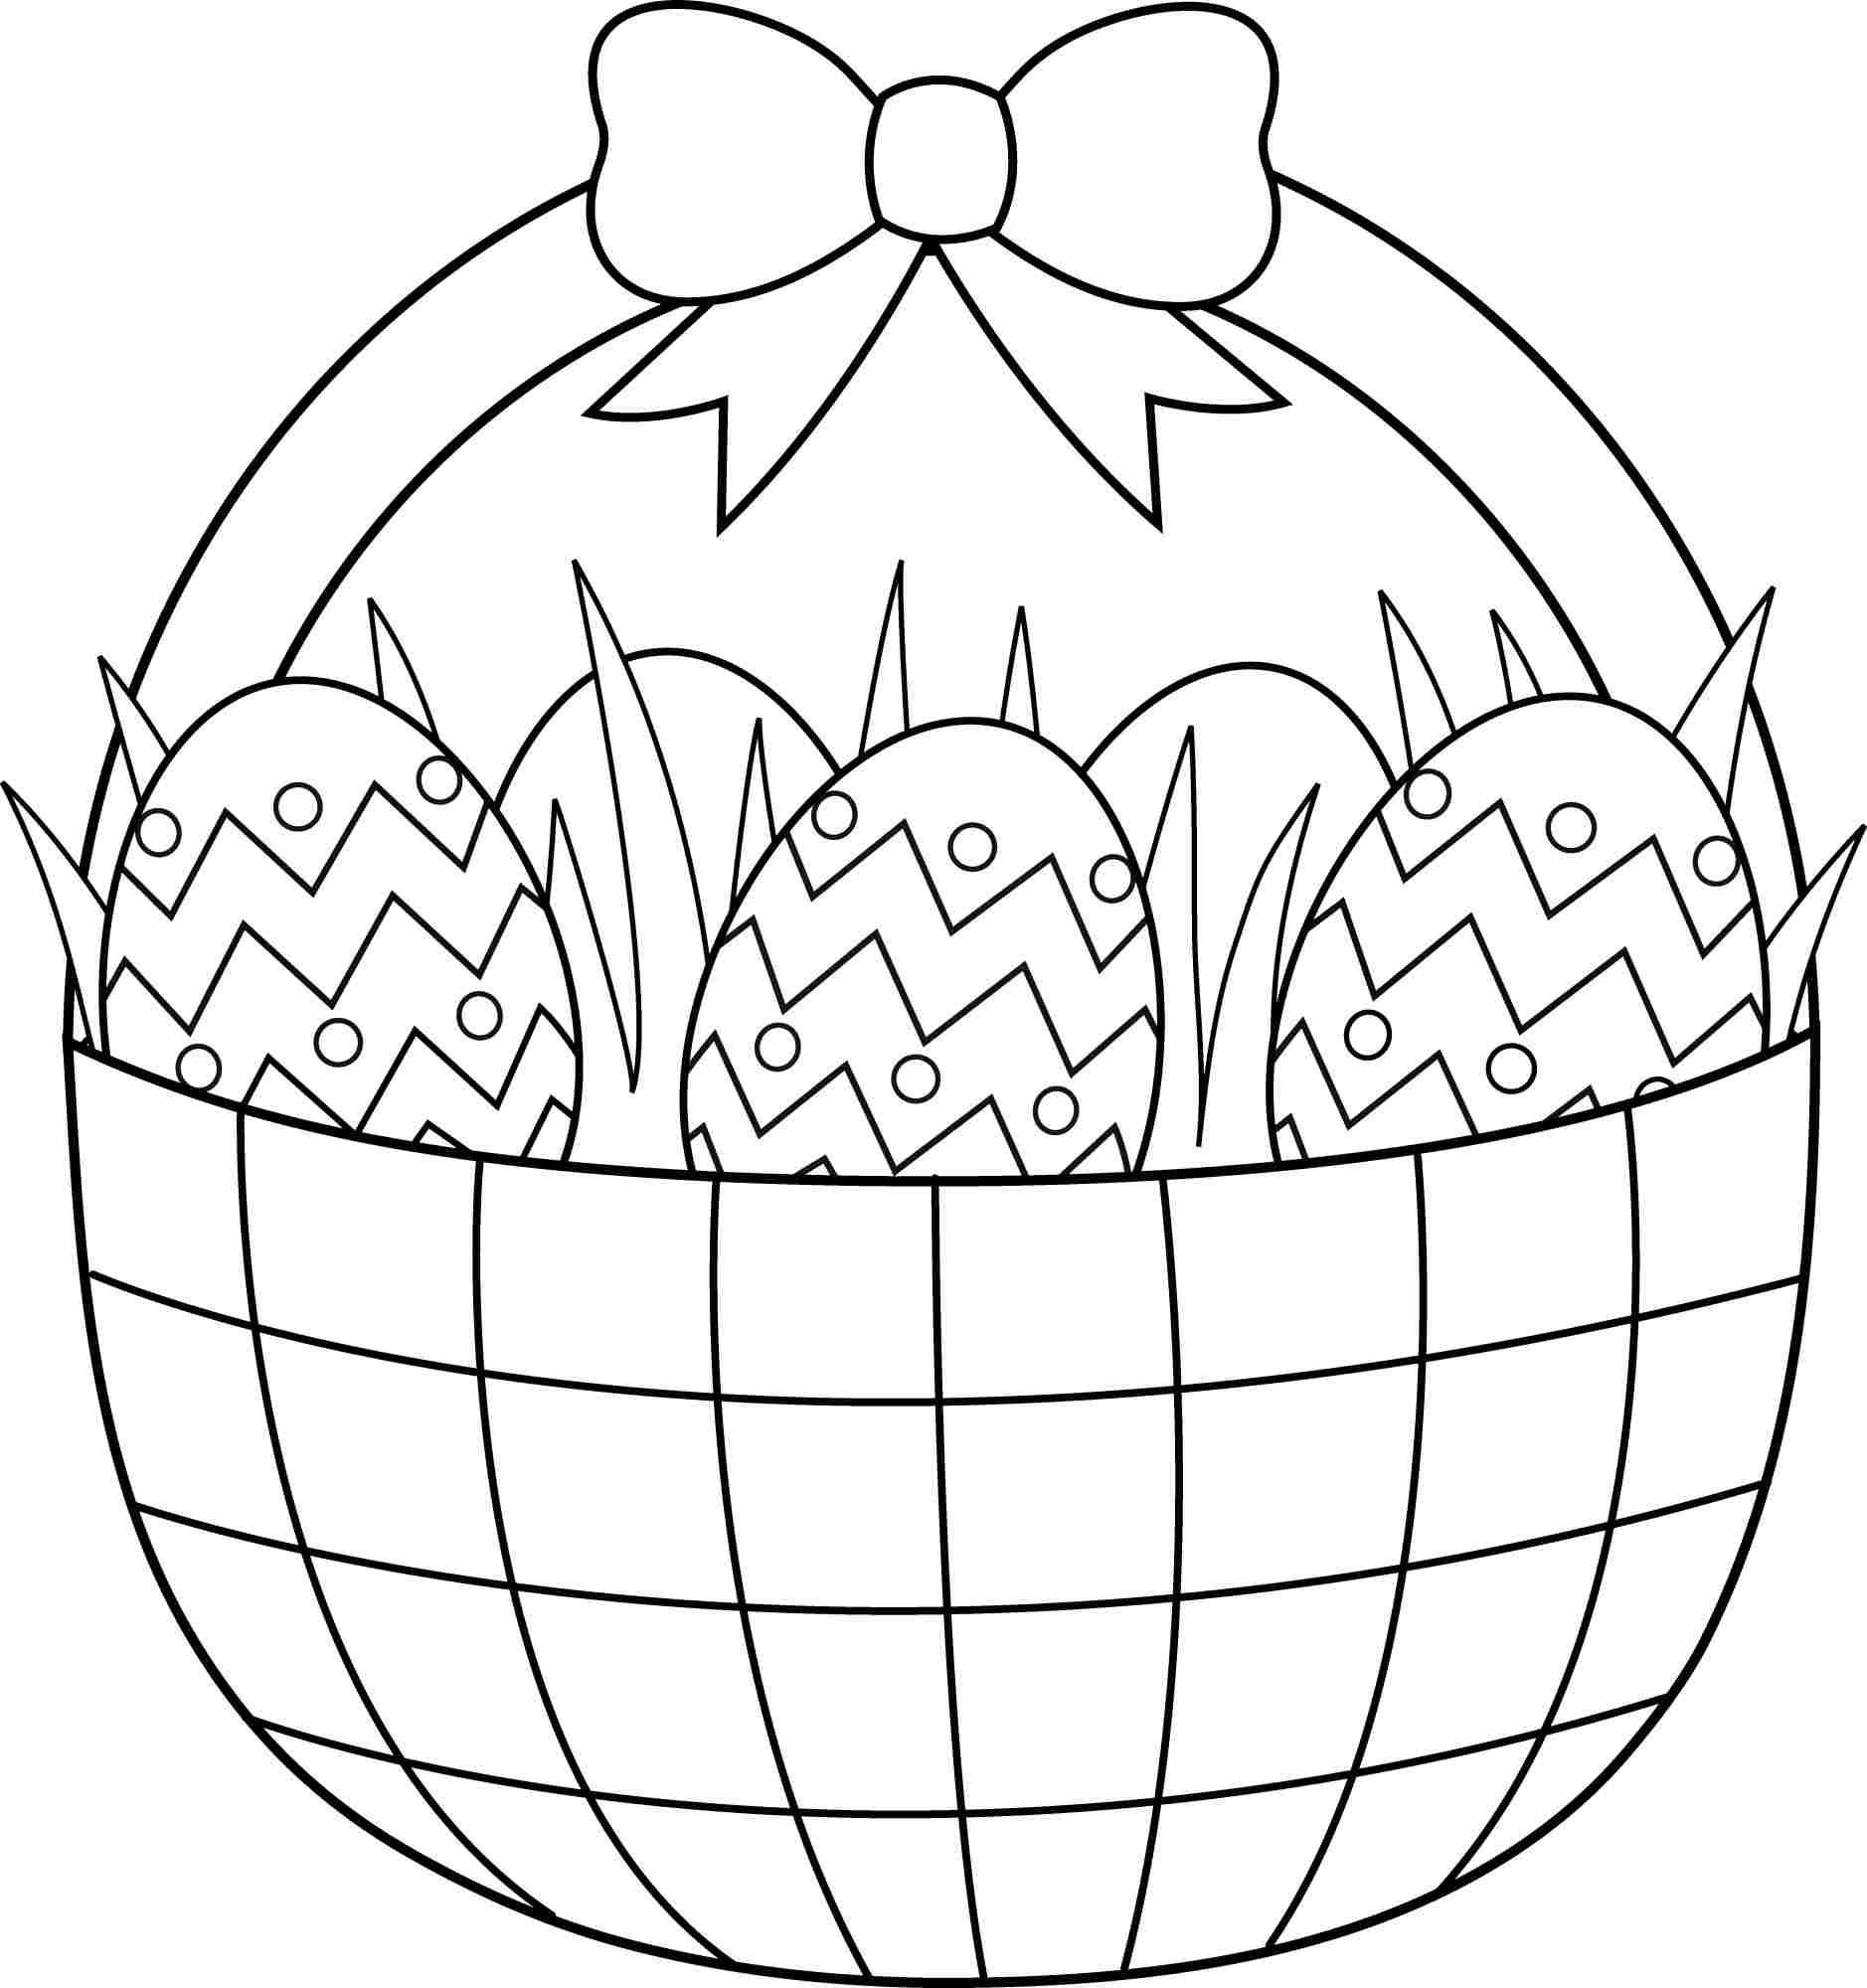 Printable Easter Coloring Pages Free Easter Coloring Pages Printable - Coloring Pages Free Printable Easter